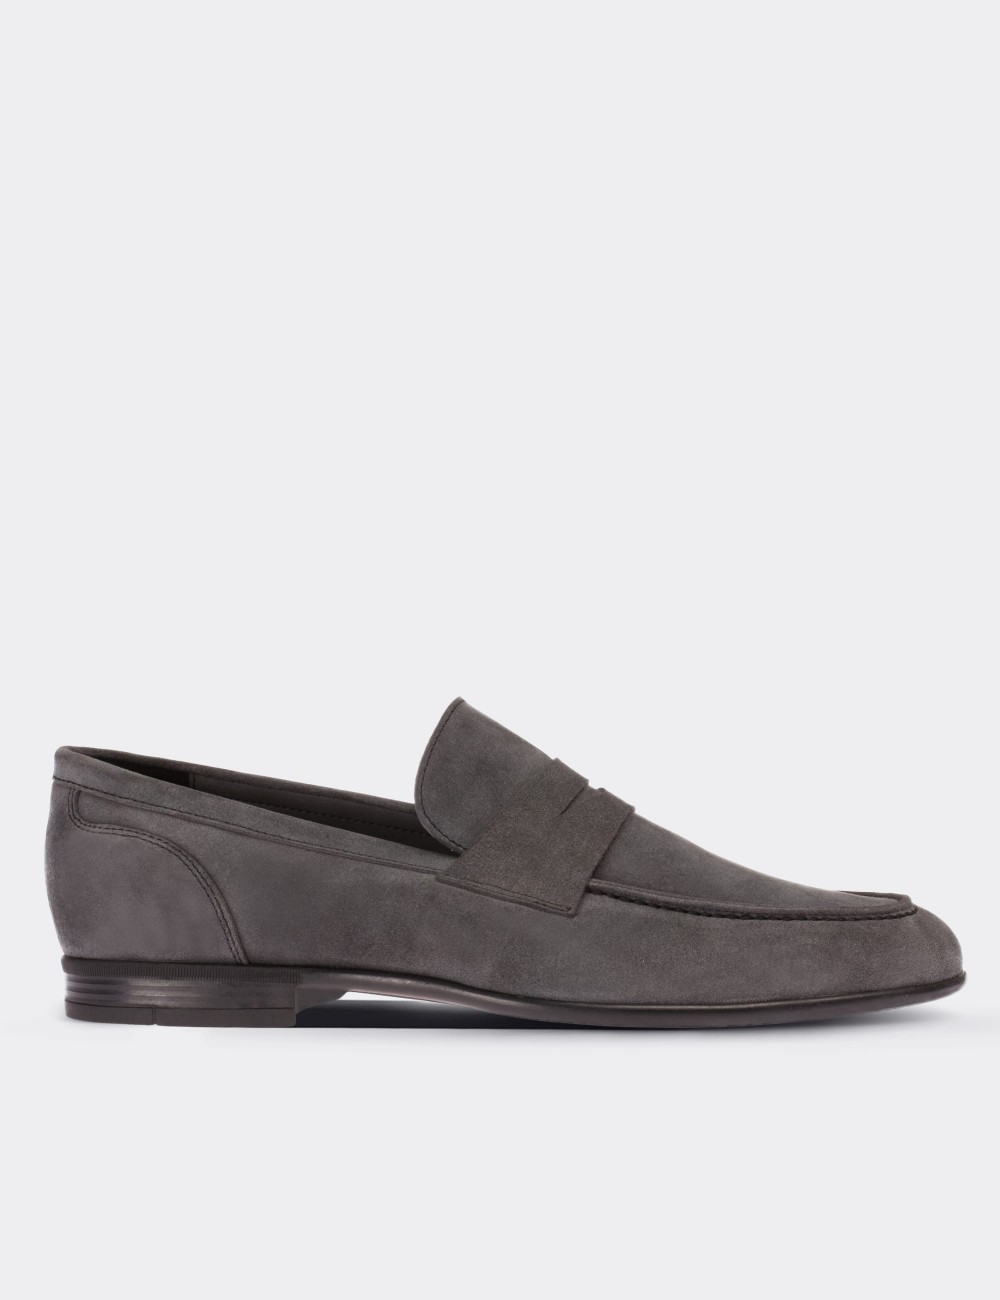 Gray Suede Leather Loafers - 01714MGRIC01